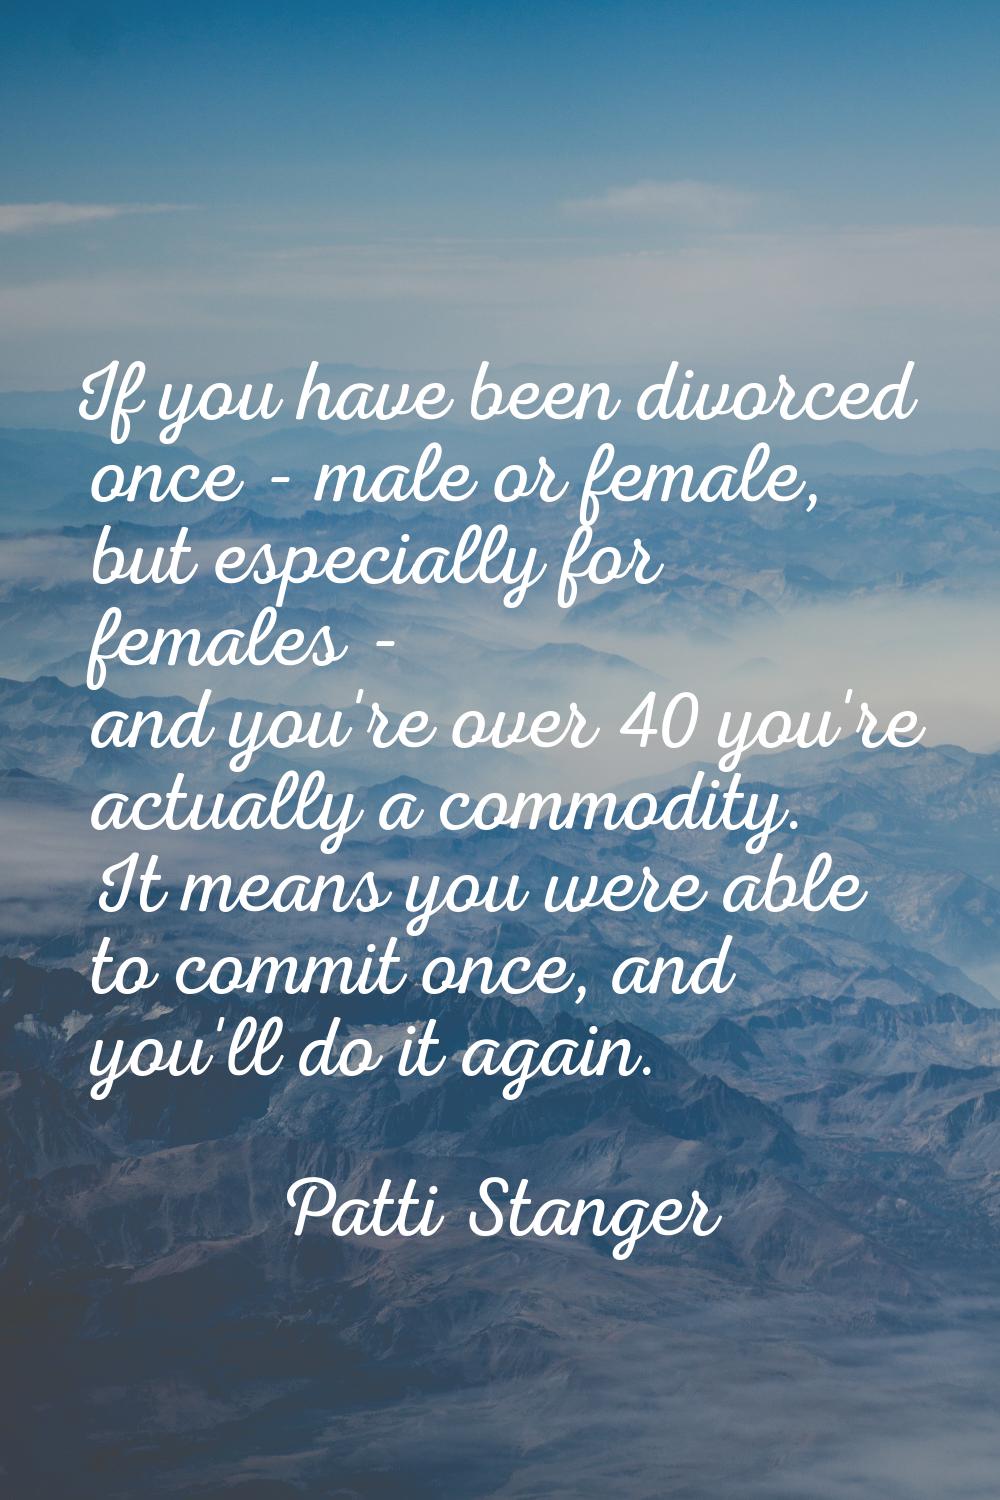 If you have been divorced once - male or female, but especially for females - and you're over 40 yo